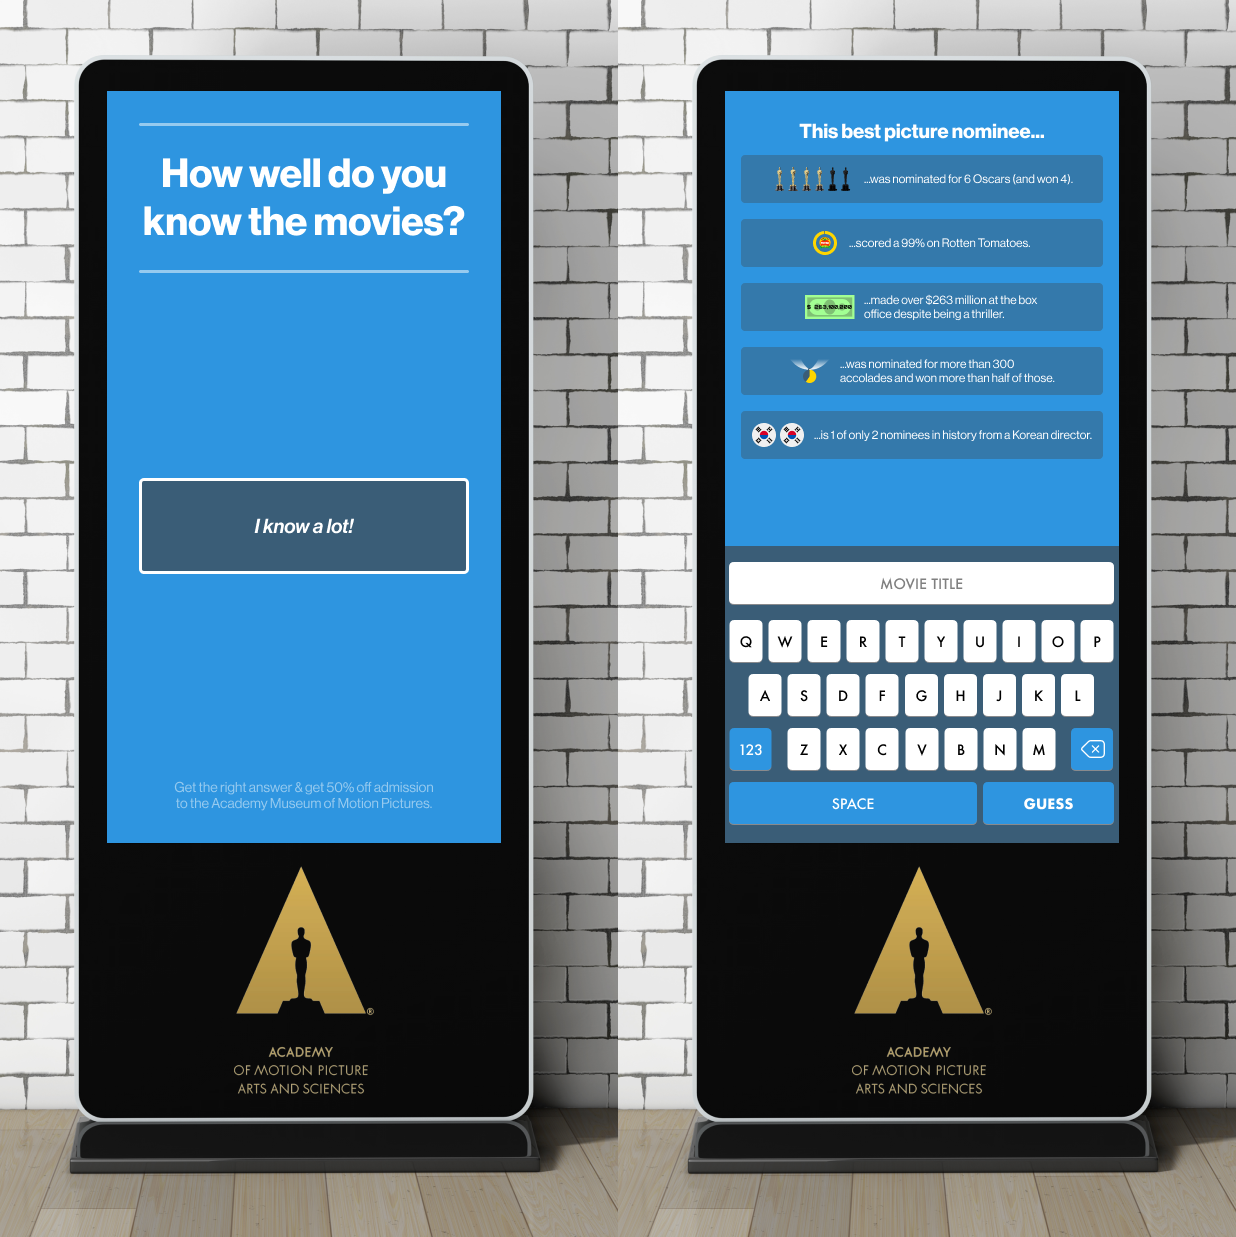 A preview image showing mockups of 2 screens at different steps of the interaction.